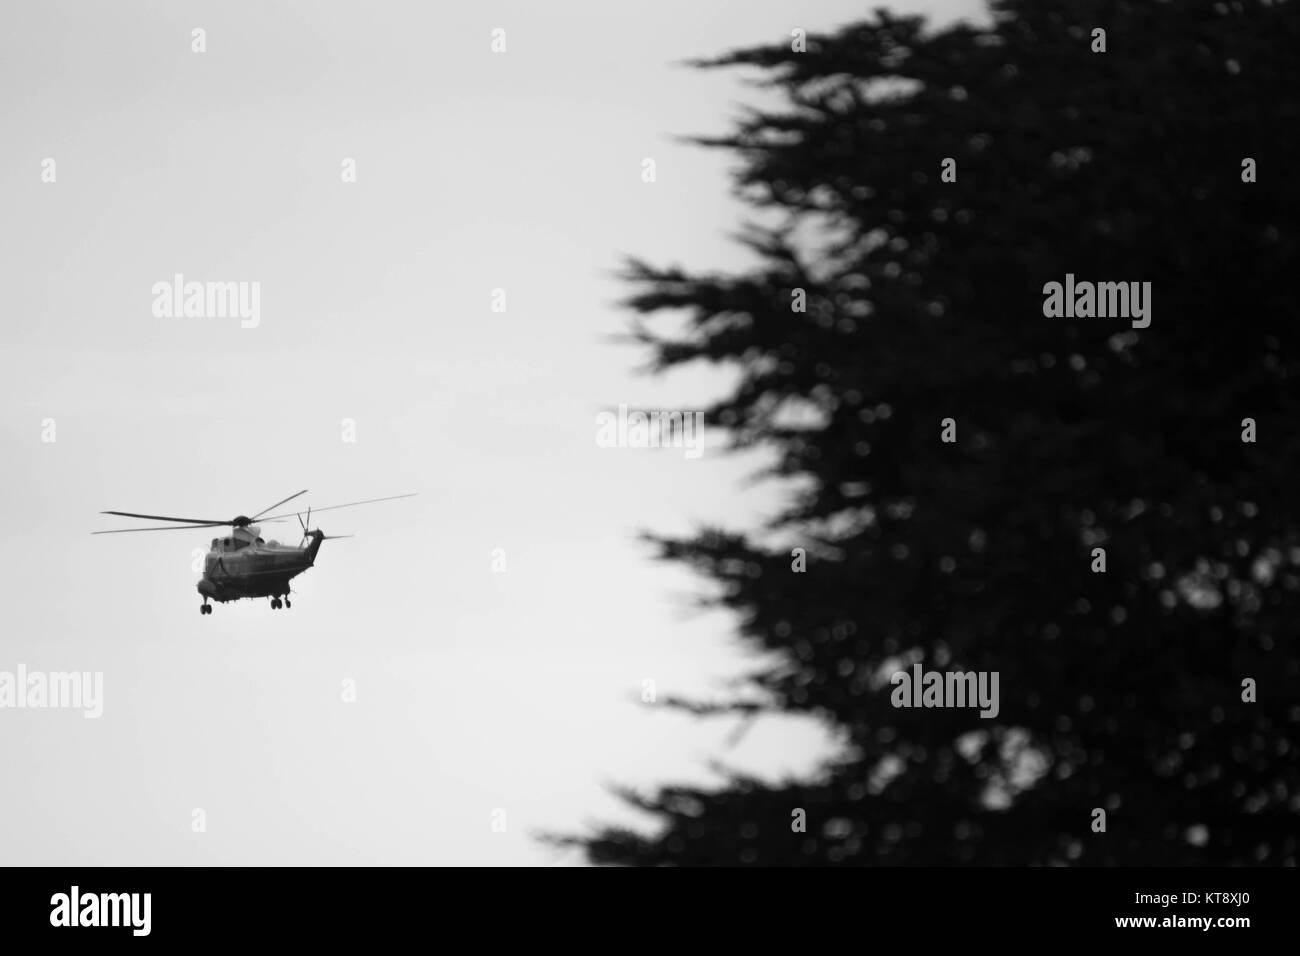 Washington, USA. 22nd Dec, 2017. Marine One carrying President Donald Trump departs the White House for Palm Beach, FL where he will be spending the Christmas holiday, Friday, December 22, 2017. Credit: Michael Candelori/Alamy Live News Stock Photo